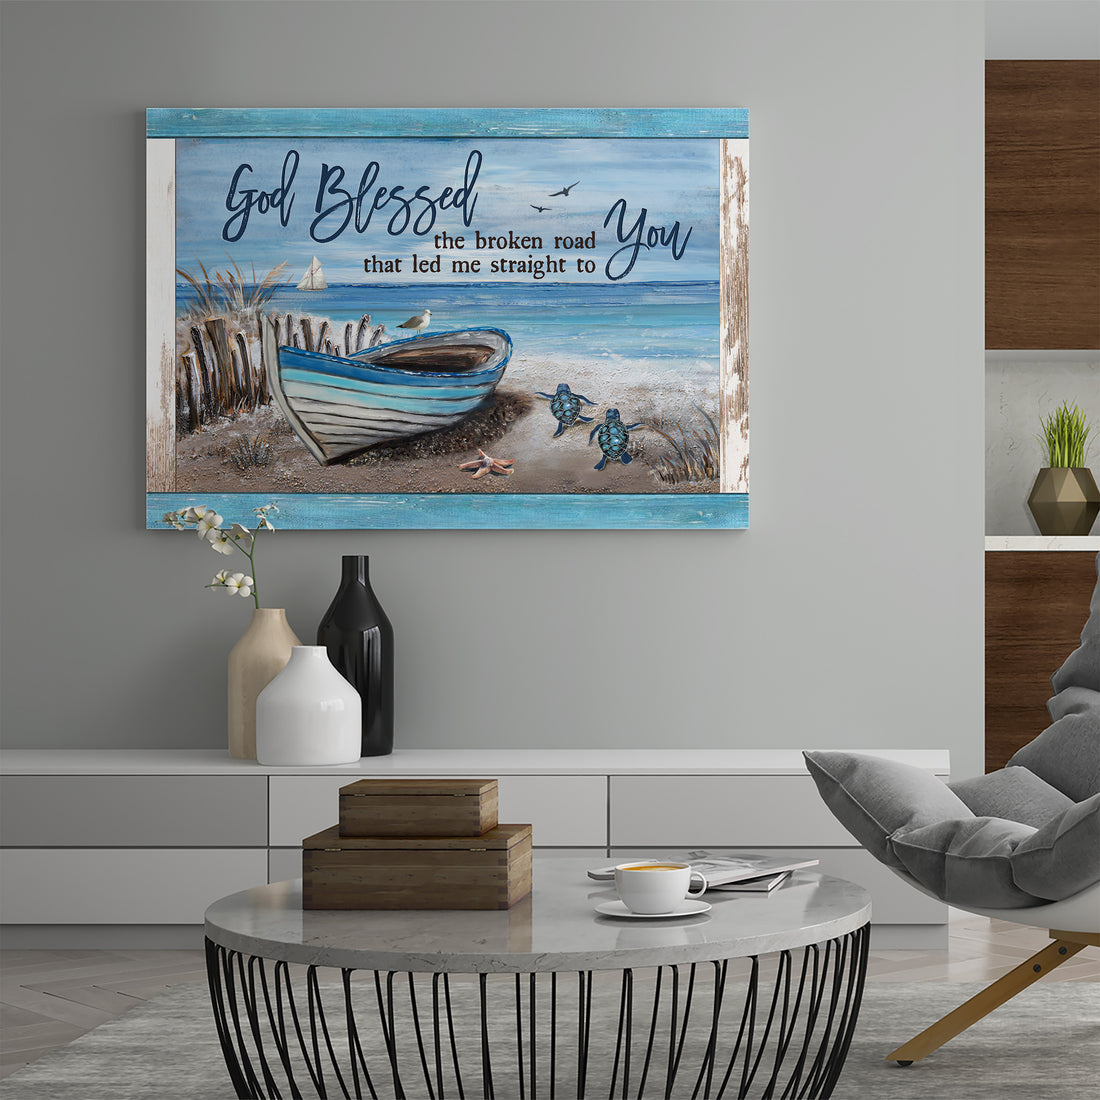 Customized Signs, God Blessed The Broken Road Poster, Beach View, Wedding Gifts, 1st Anniversary, Couple Gifts, Wall Art For Living Room